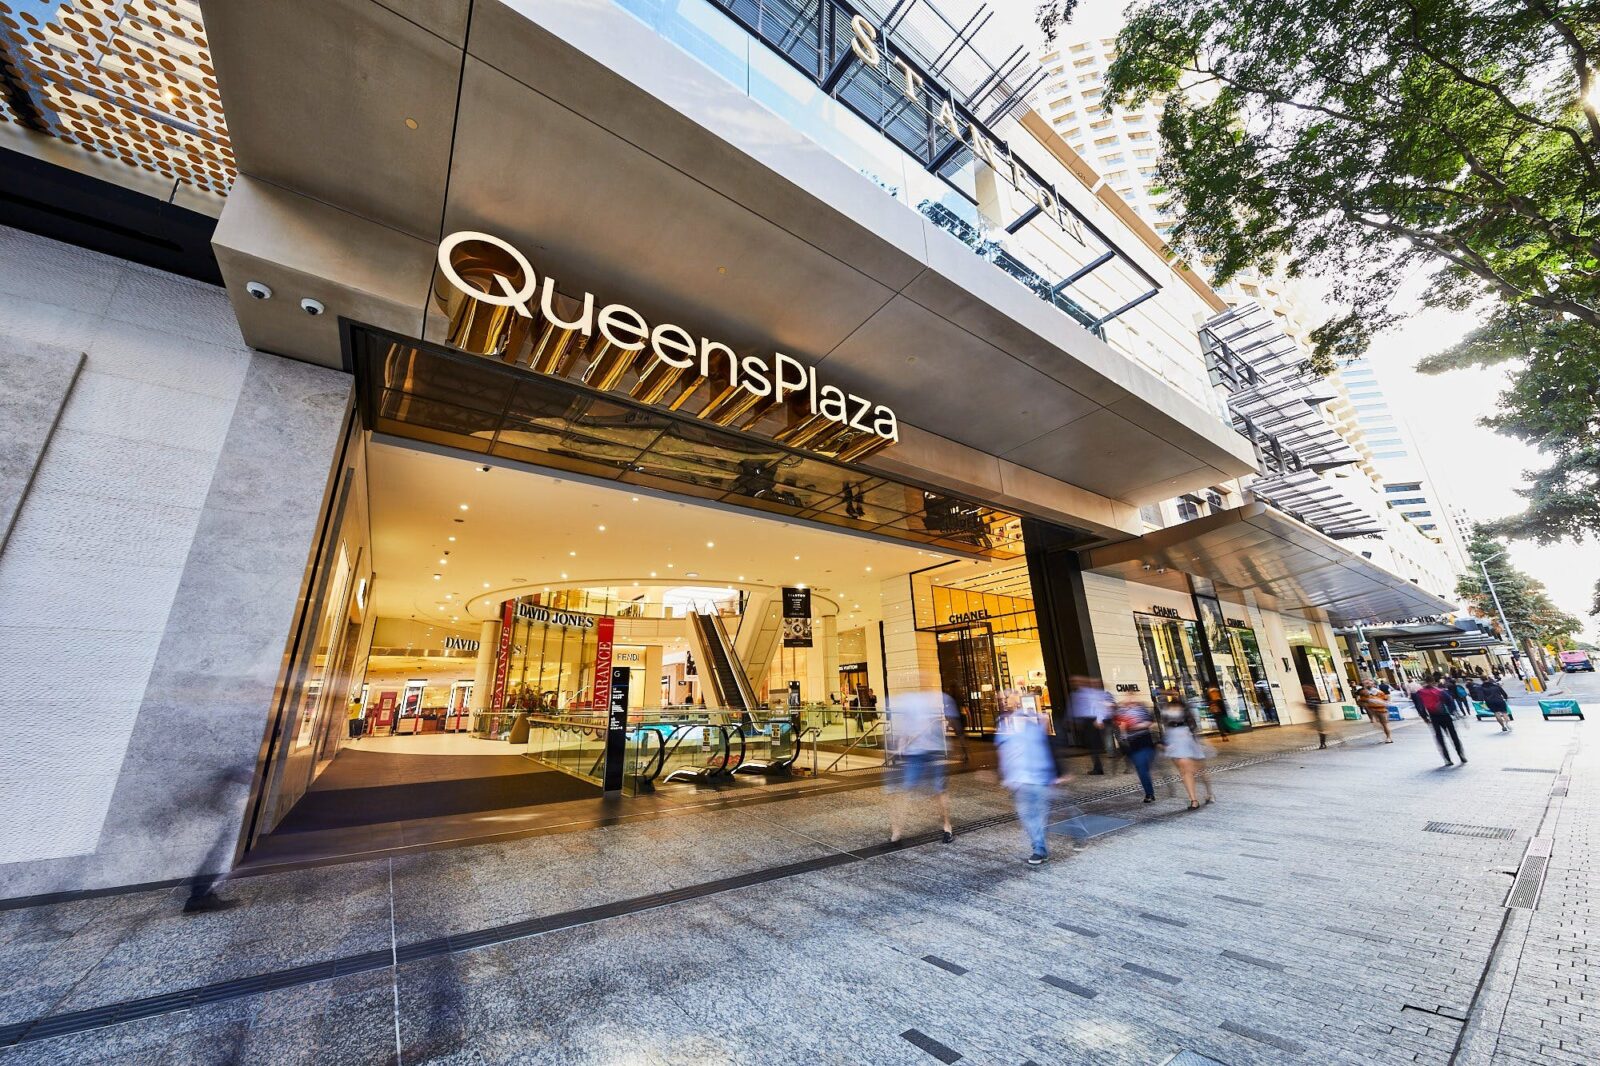 QueensPlaza outside view